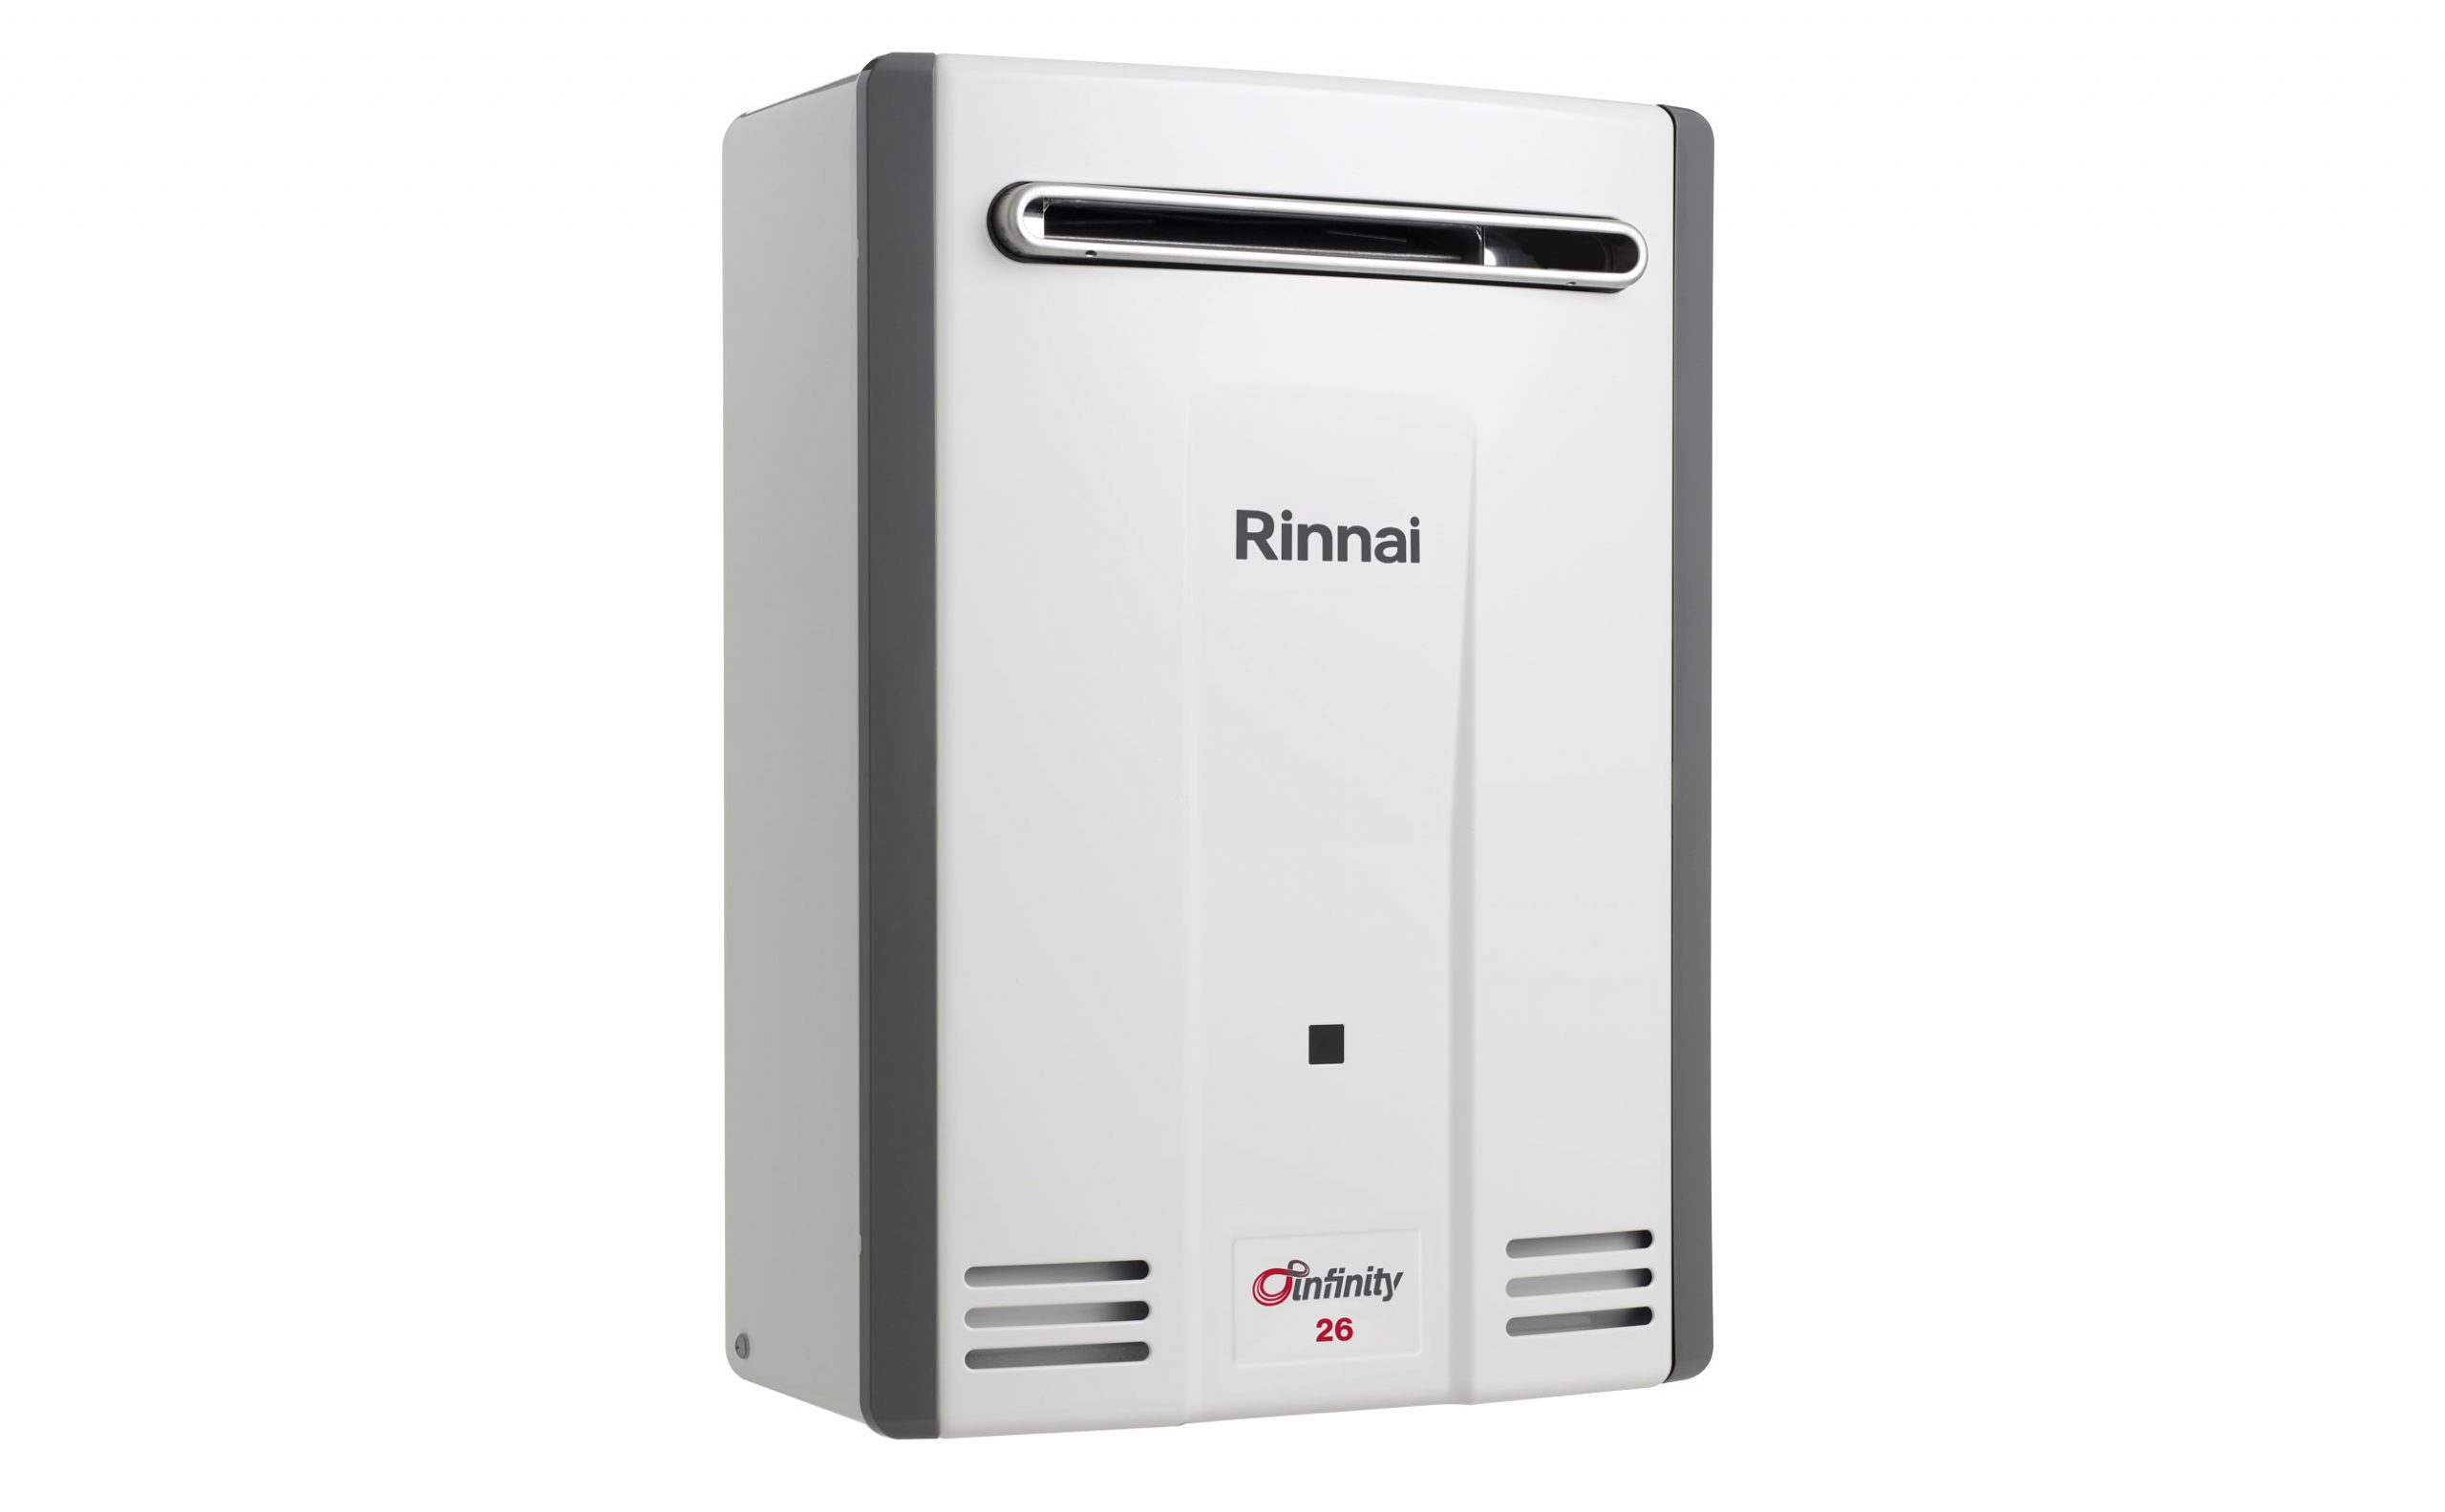 Rinnai-Infinity-CF-Confintuous-Flow-26-Angle-Right-scaled